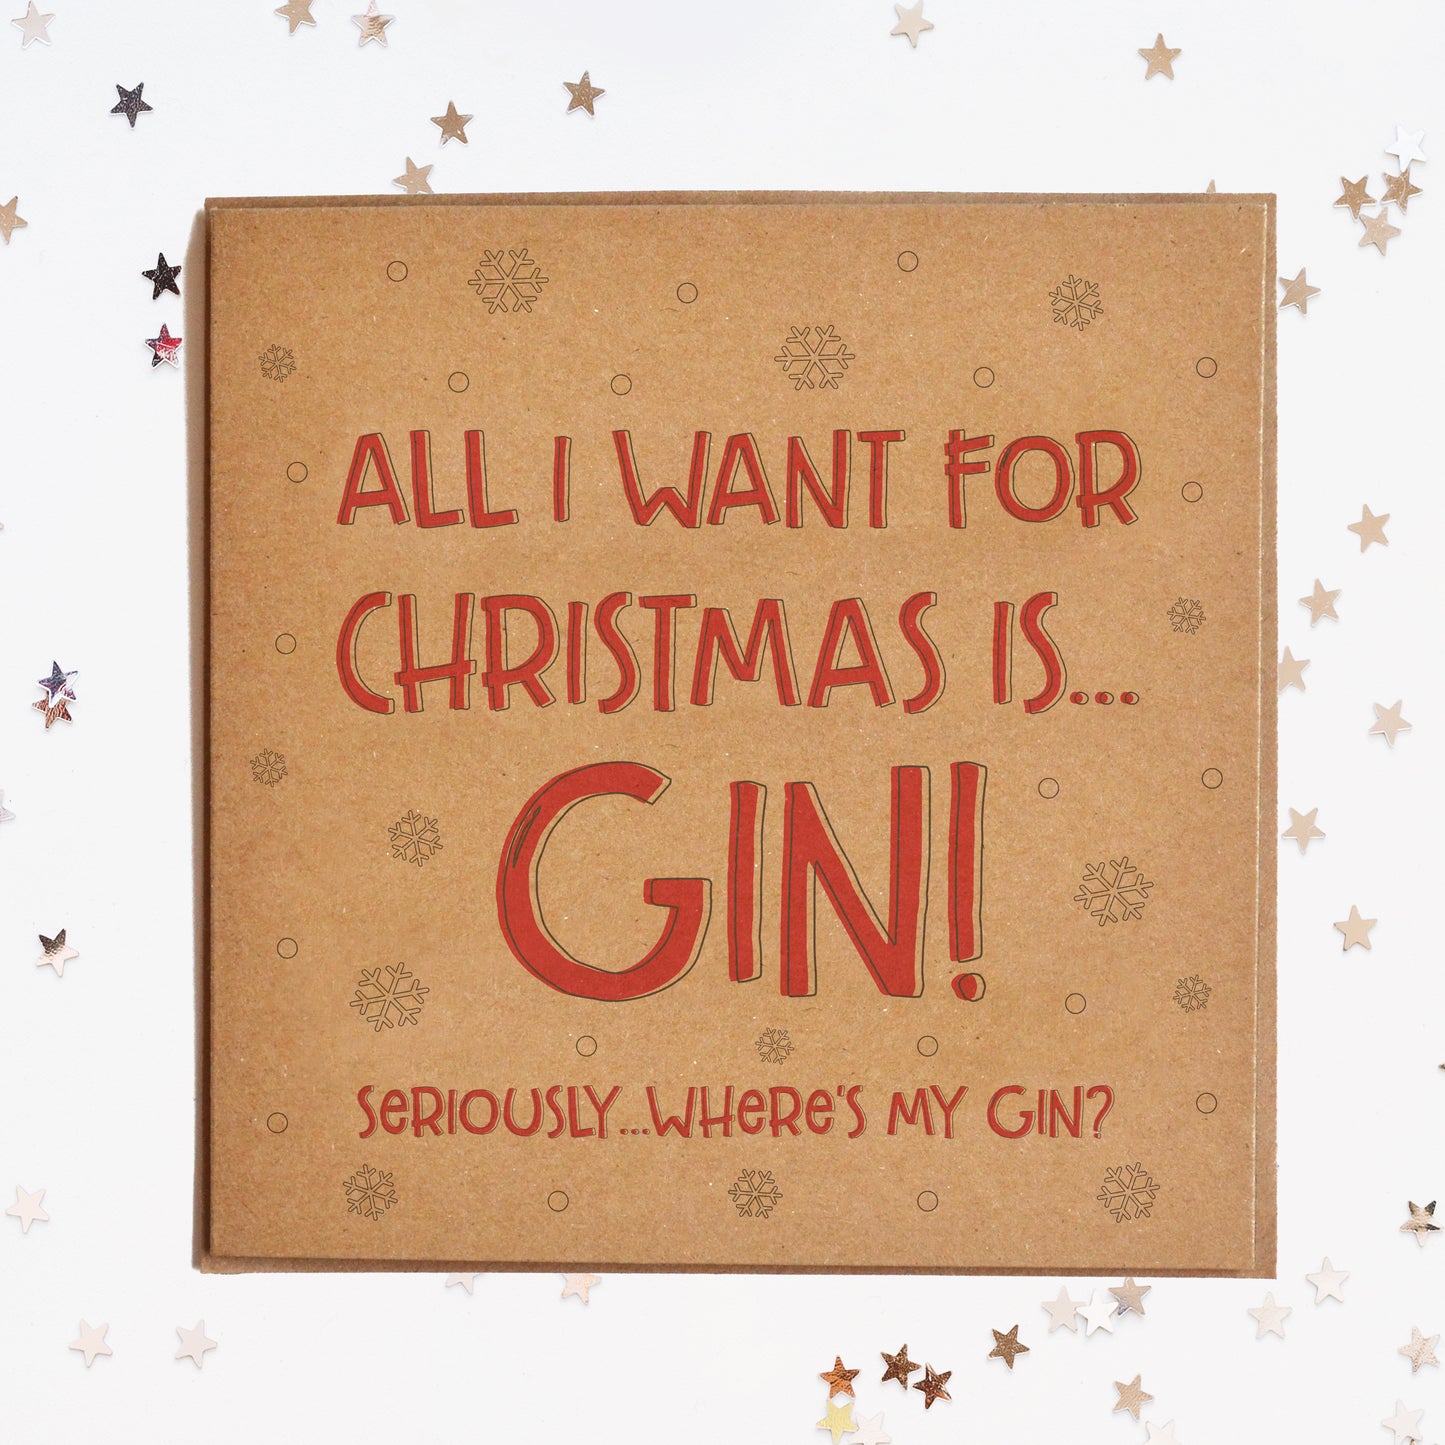 A funny Christmas card in festive colours and the message "All I Want For Christmas Is...Gin! Seriously Where's My Gin?".